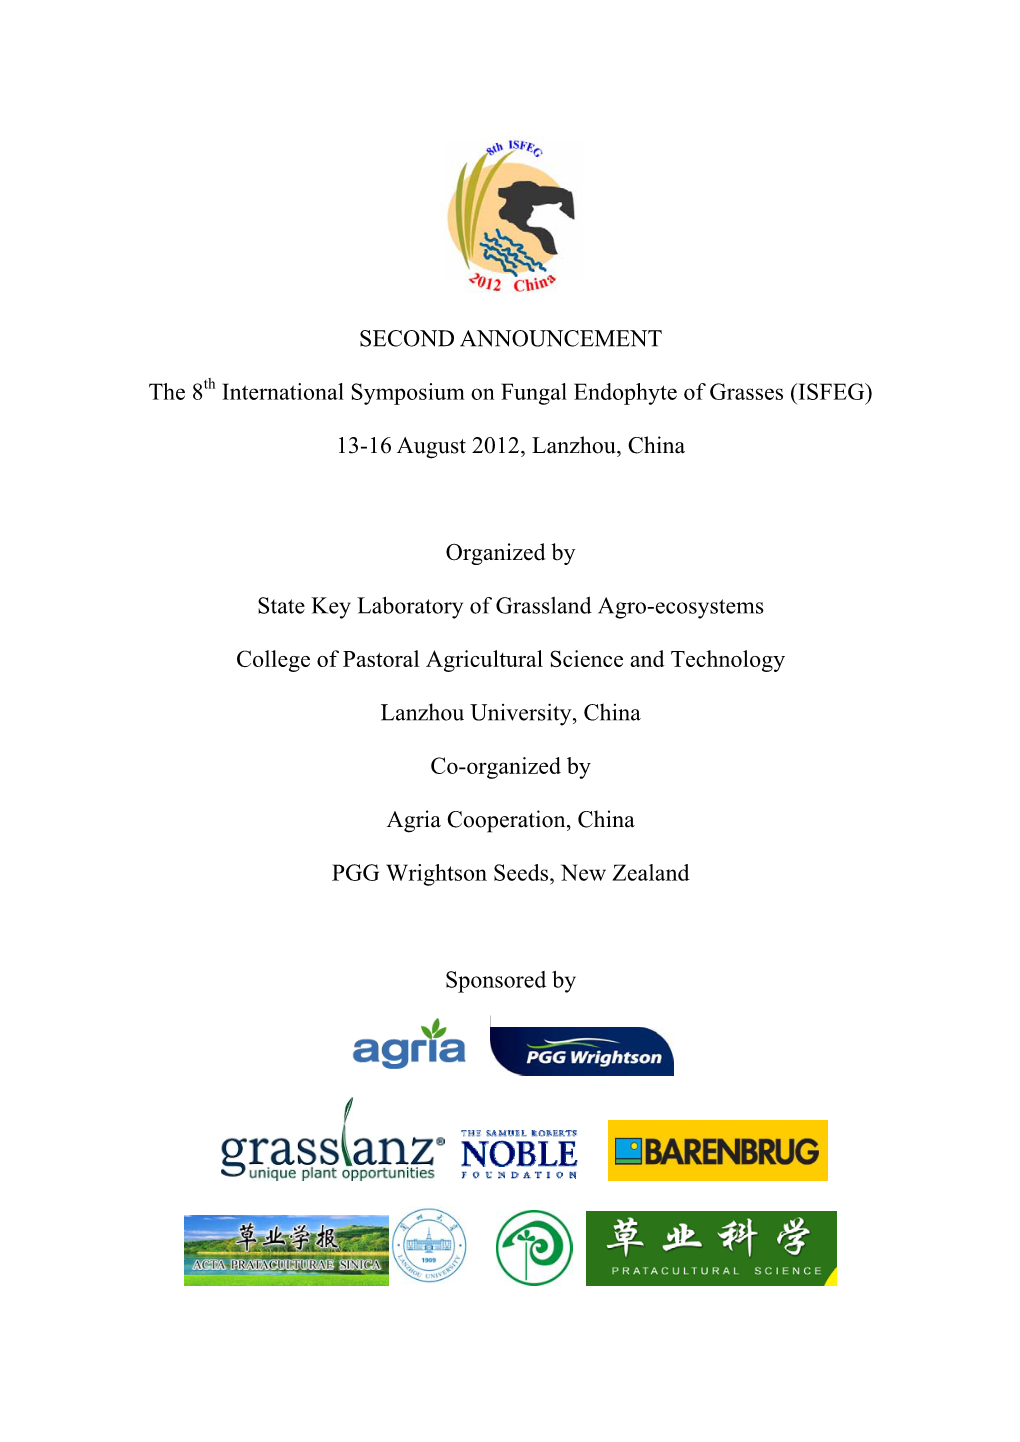 SECOND ANNOUNCEMENT the 8 International Symposium on Fungal